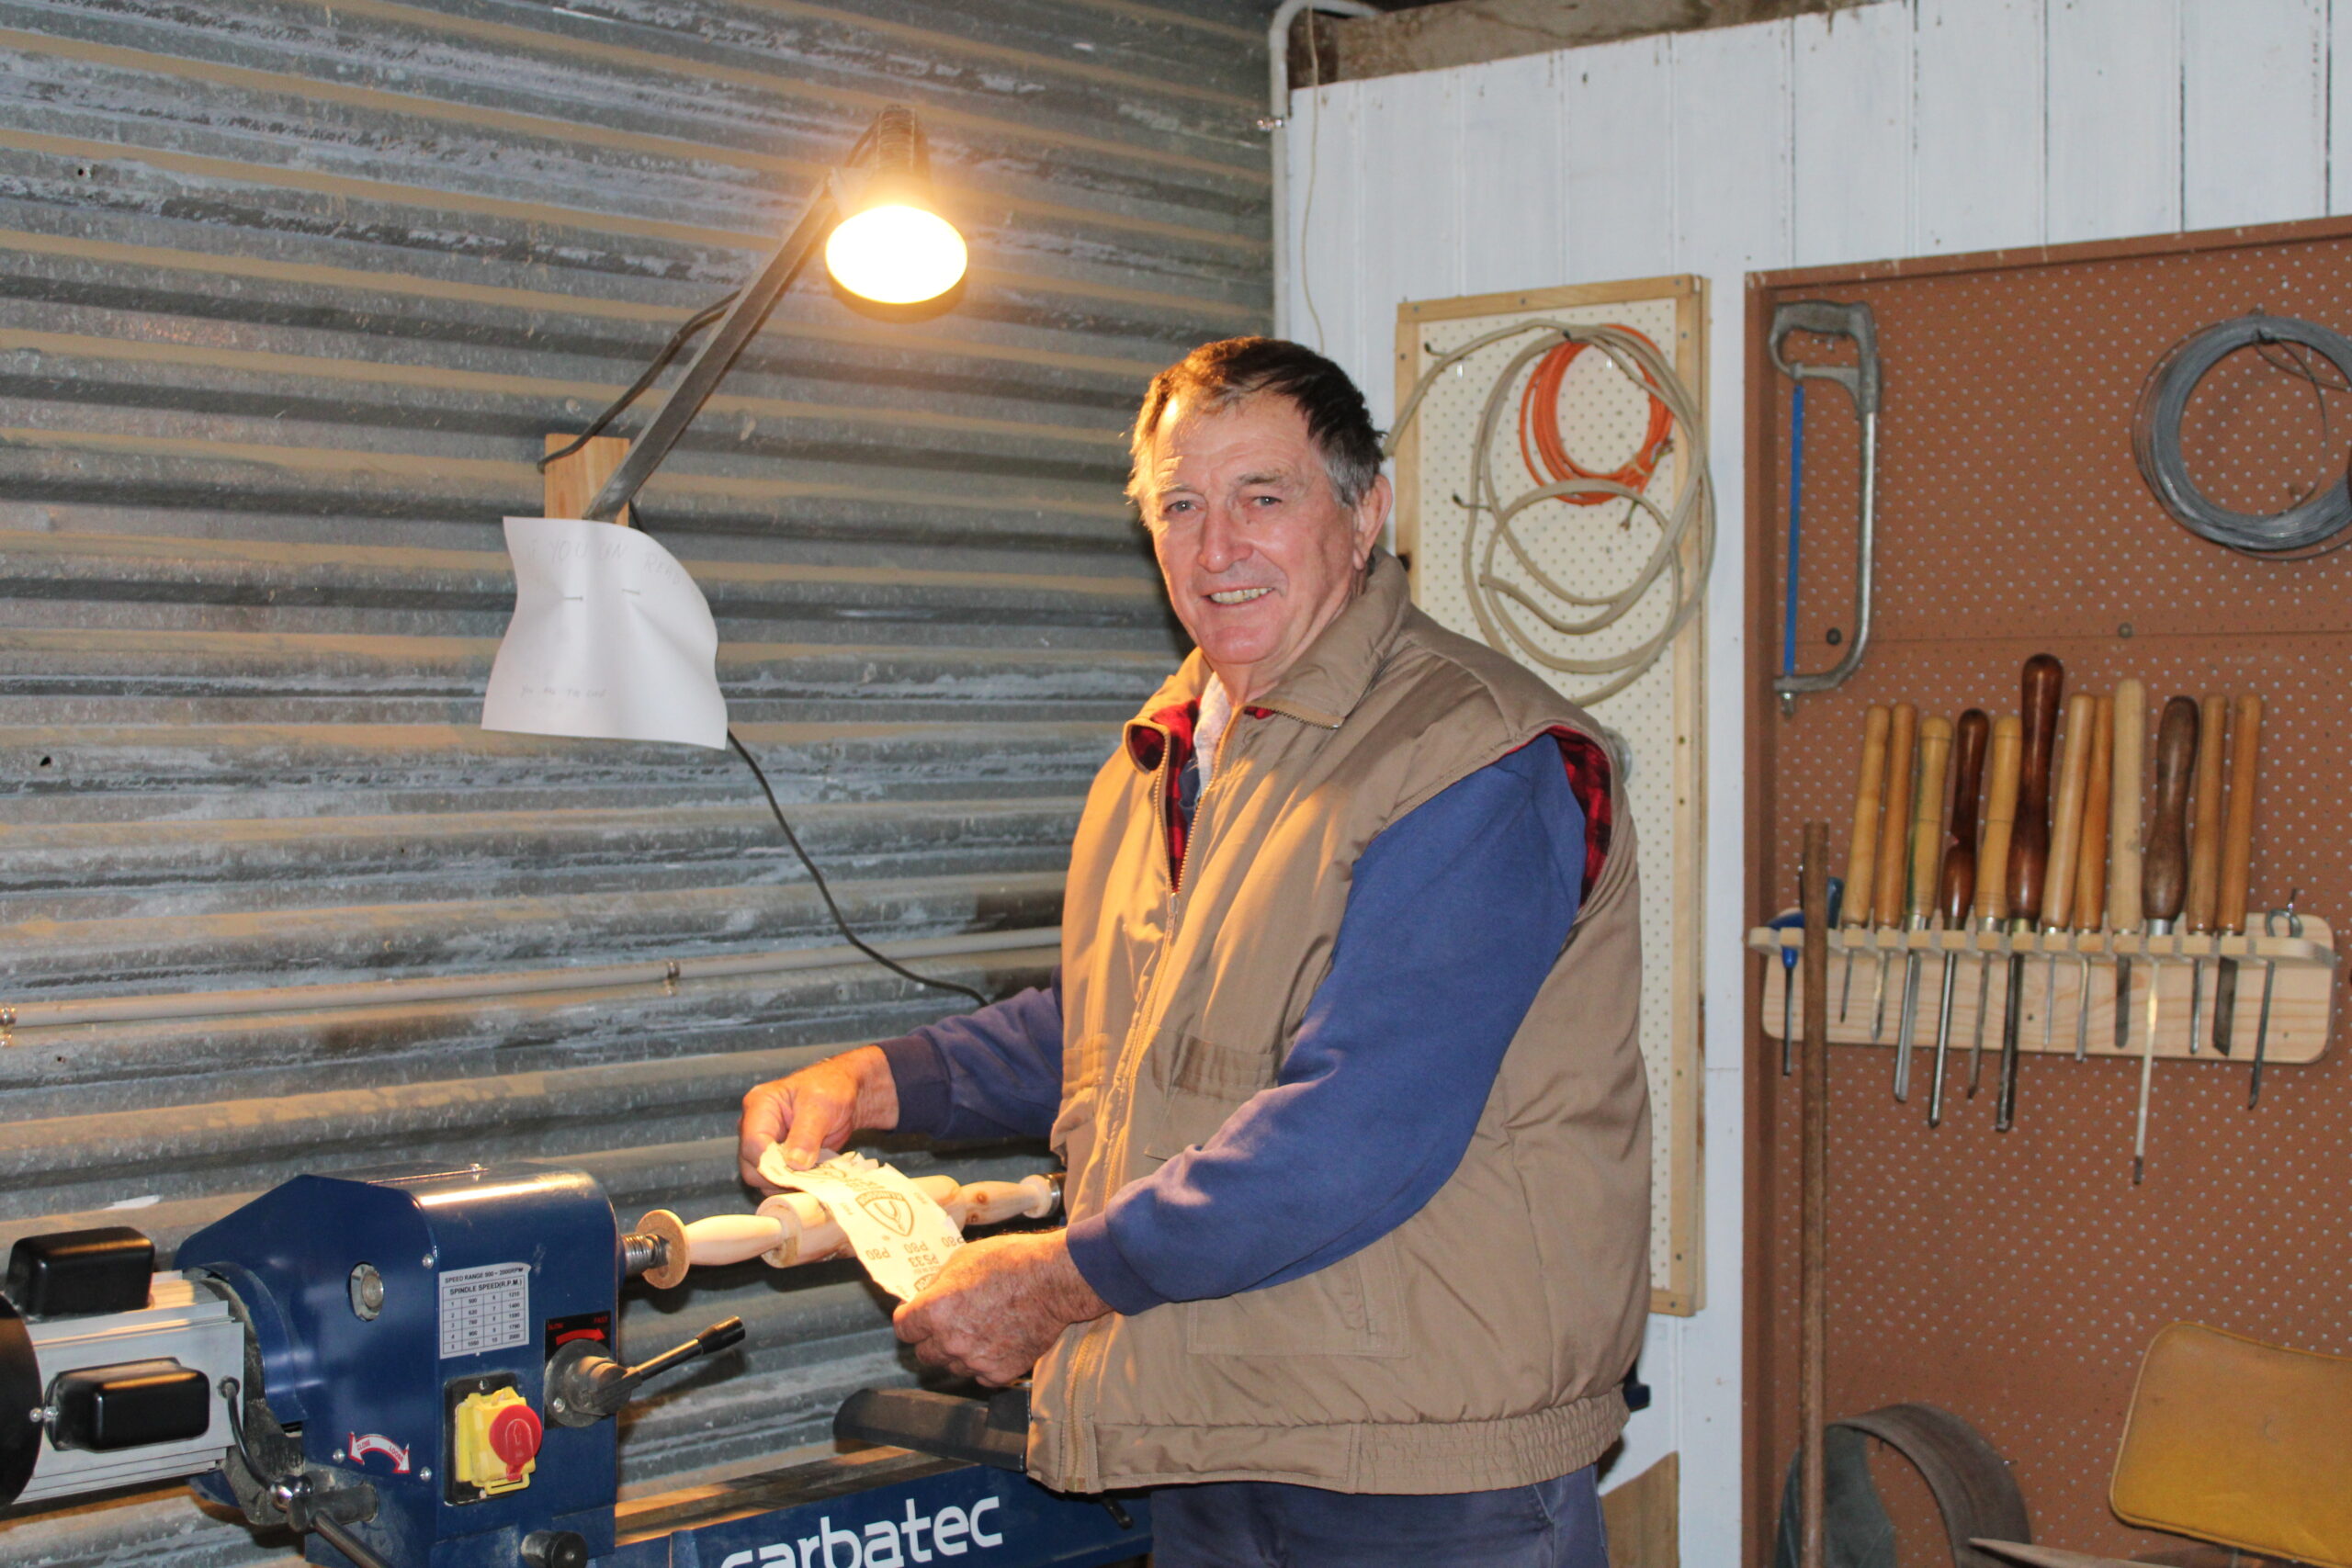 Men’s Shed excited to be open again | PHOTOS